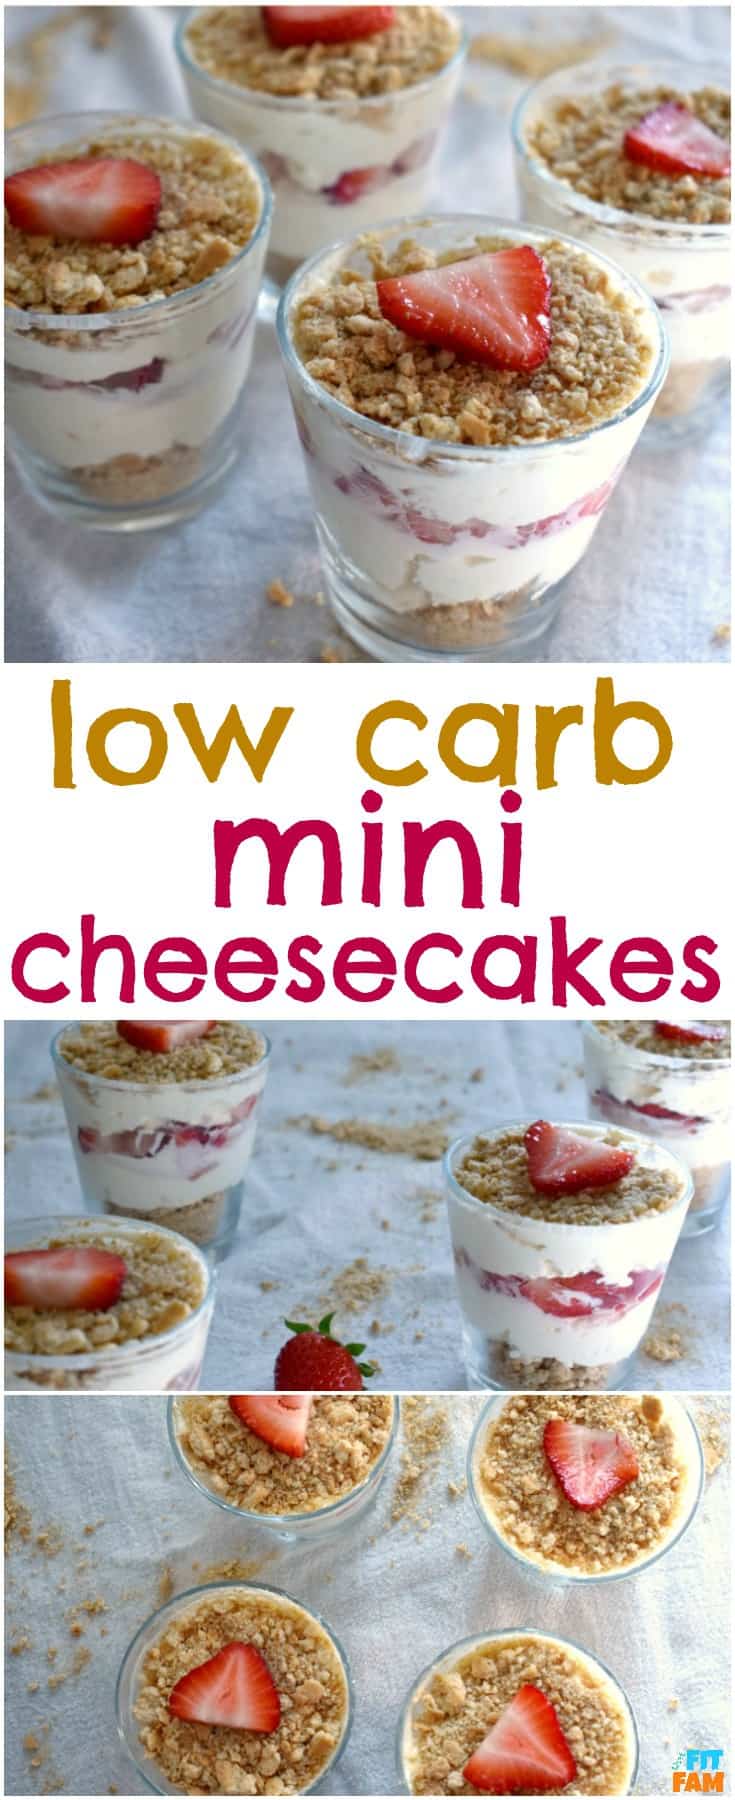 low carb mini cheesecakes that are healthy, high protein and a great dessert to bring to parties